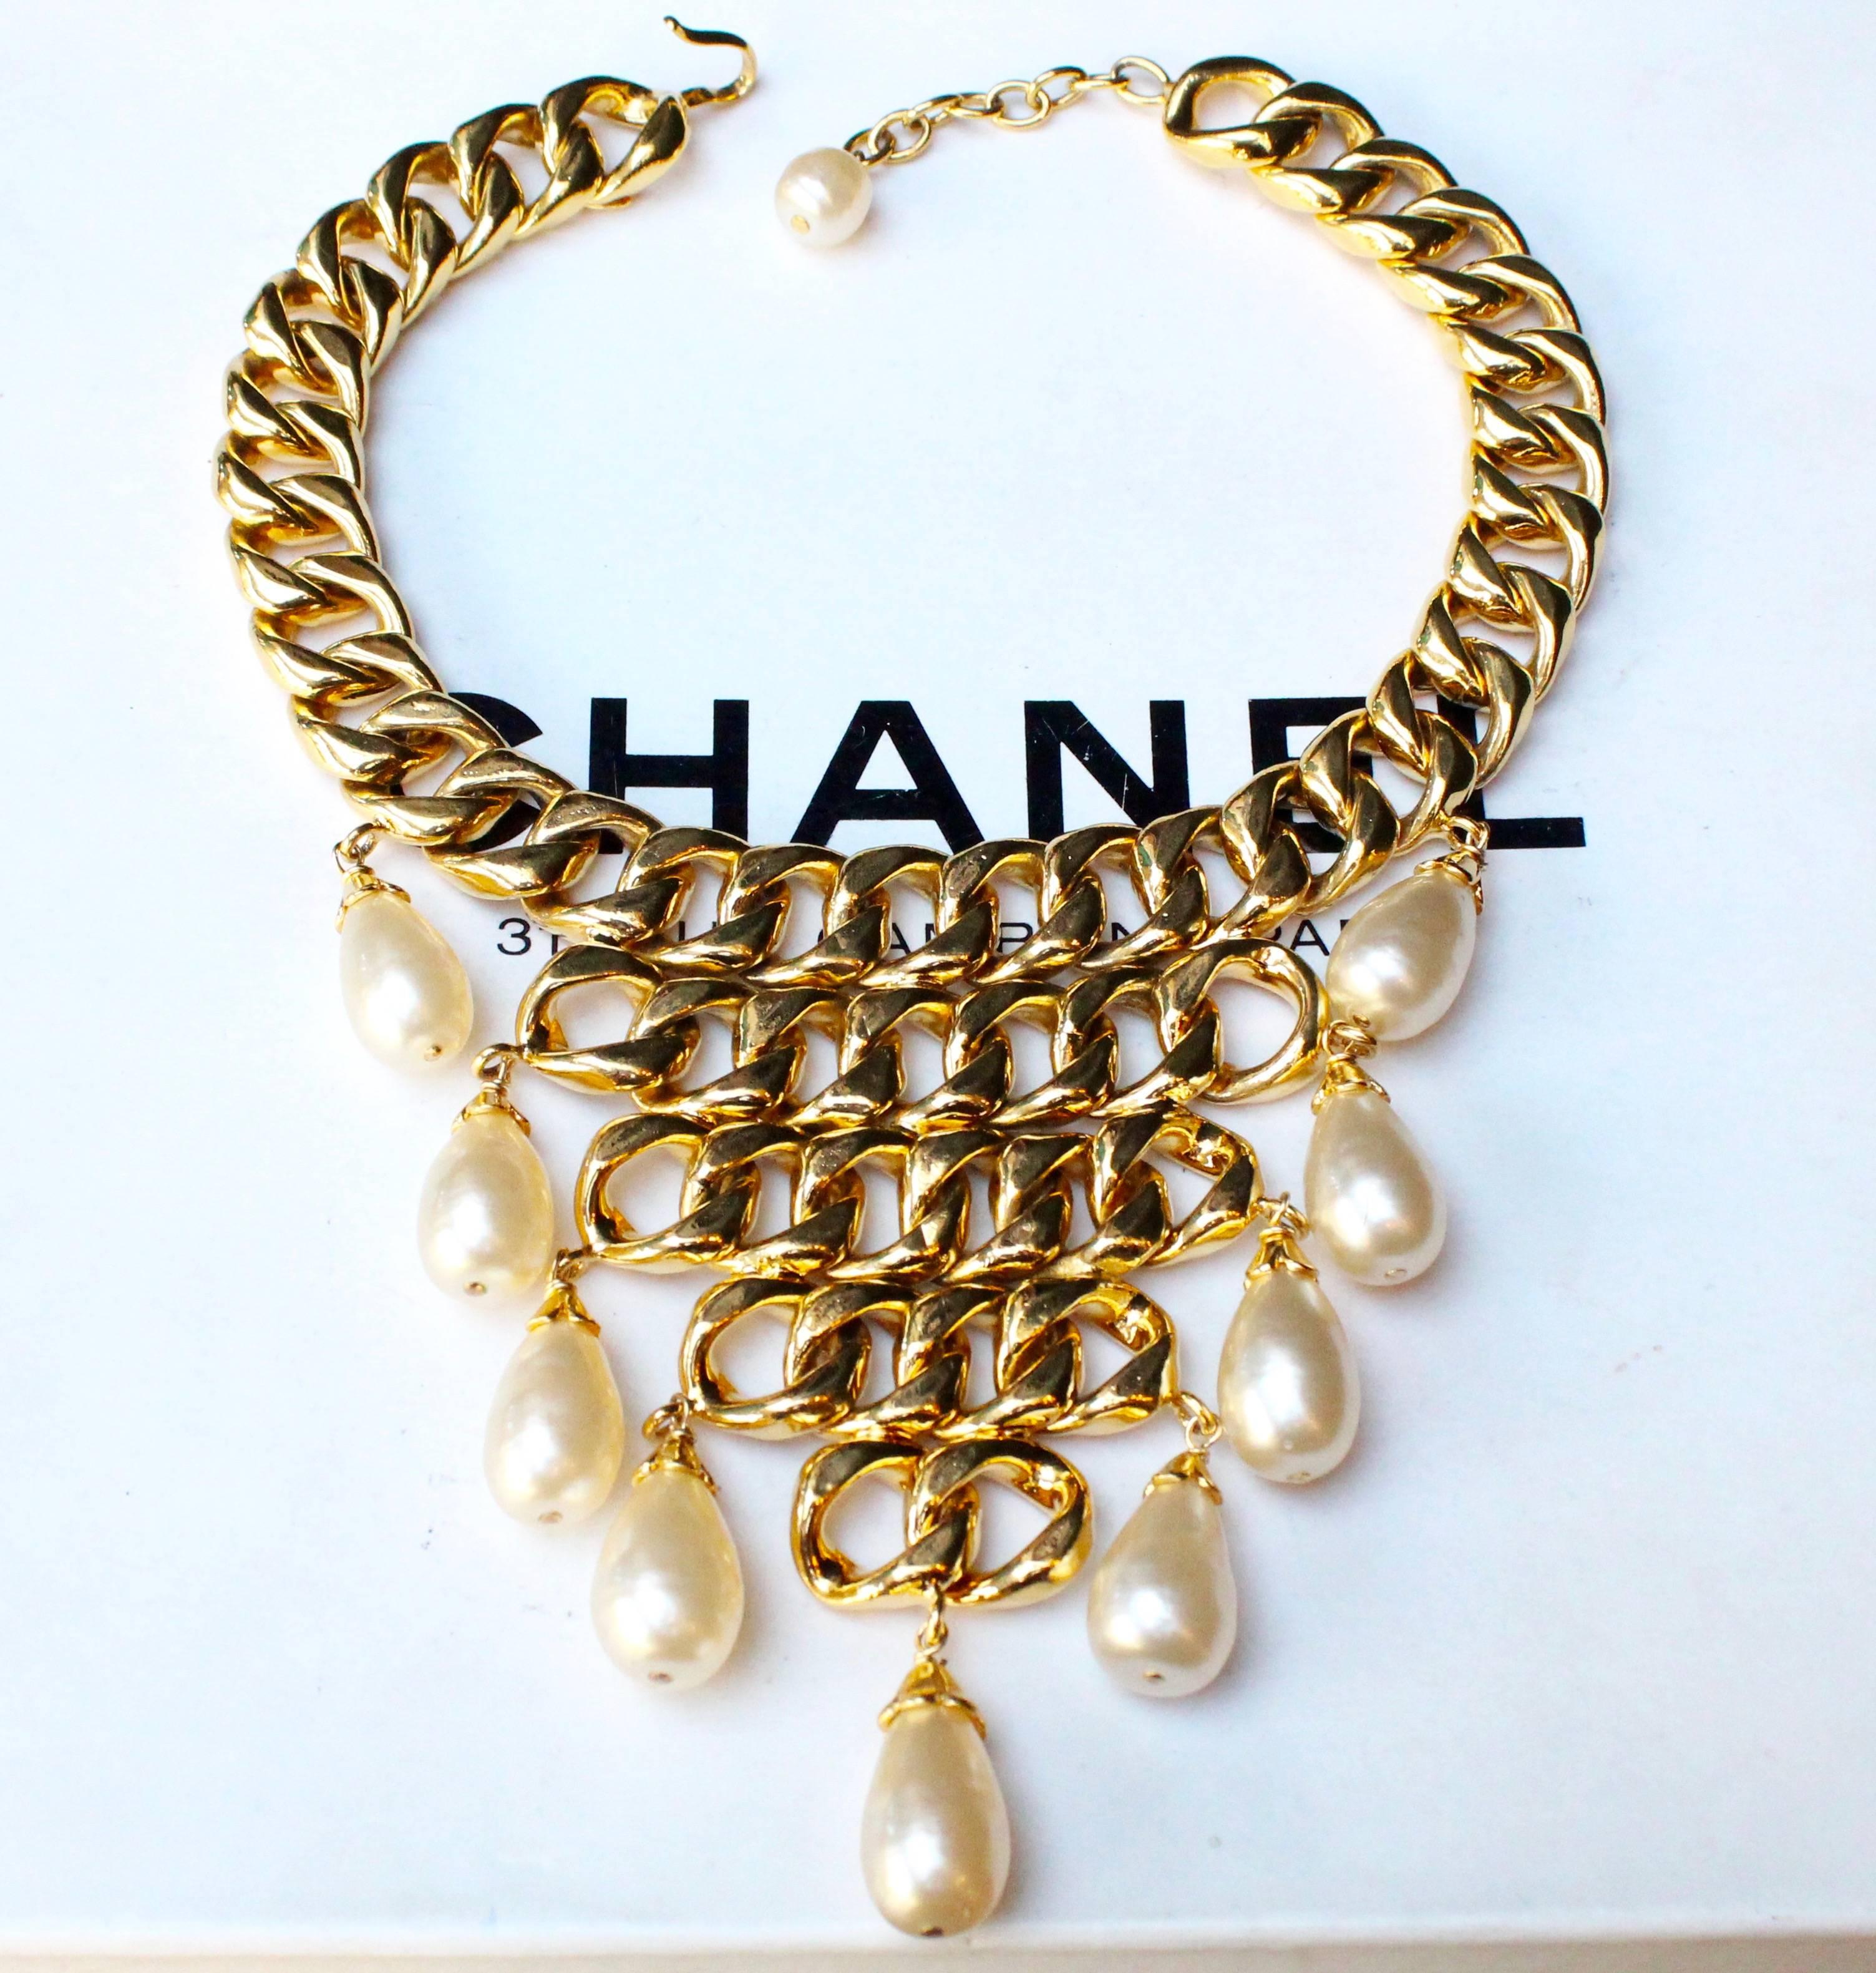 Chanel iconic necklace composed of gilded metal and pearly tear-drops 1